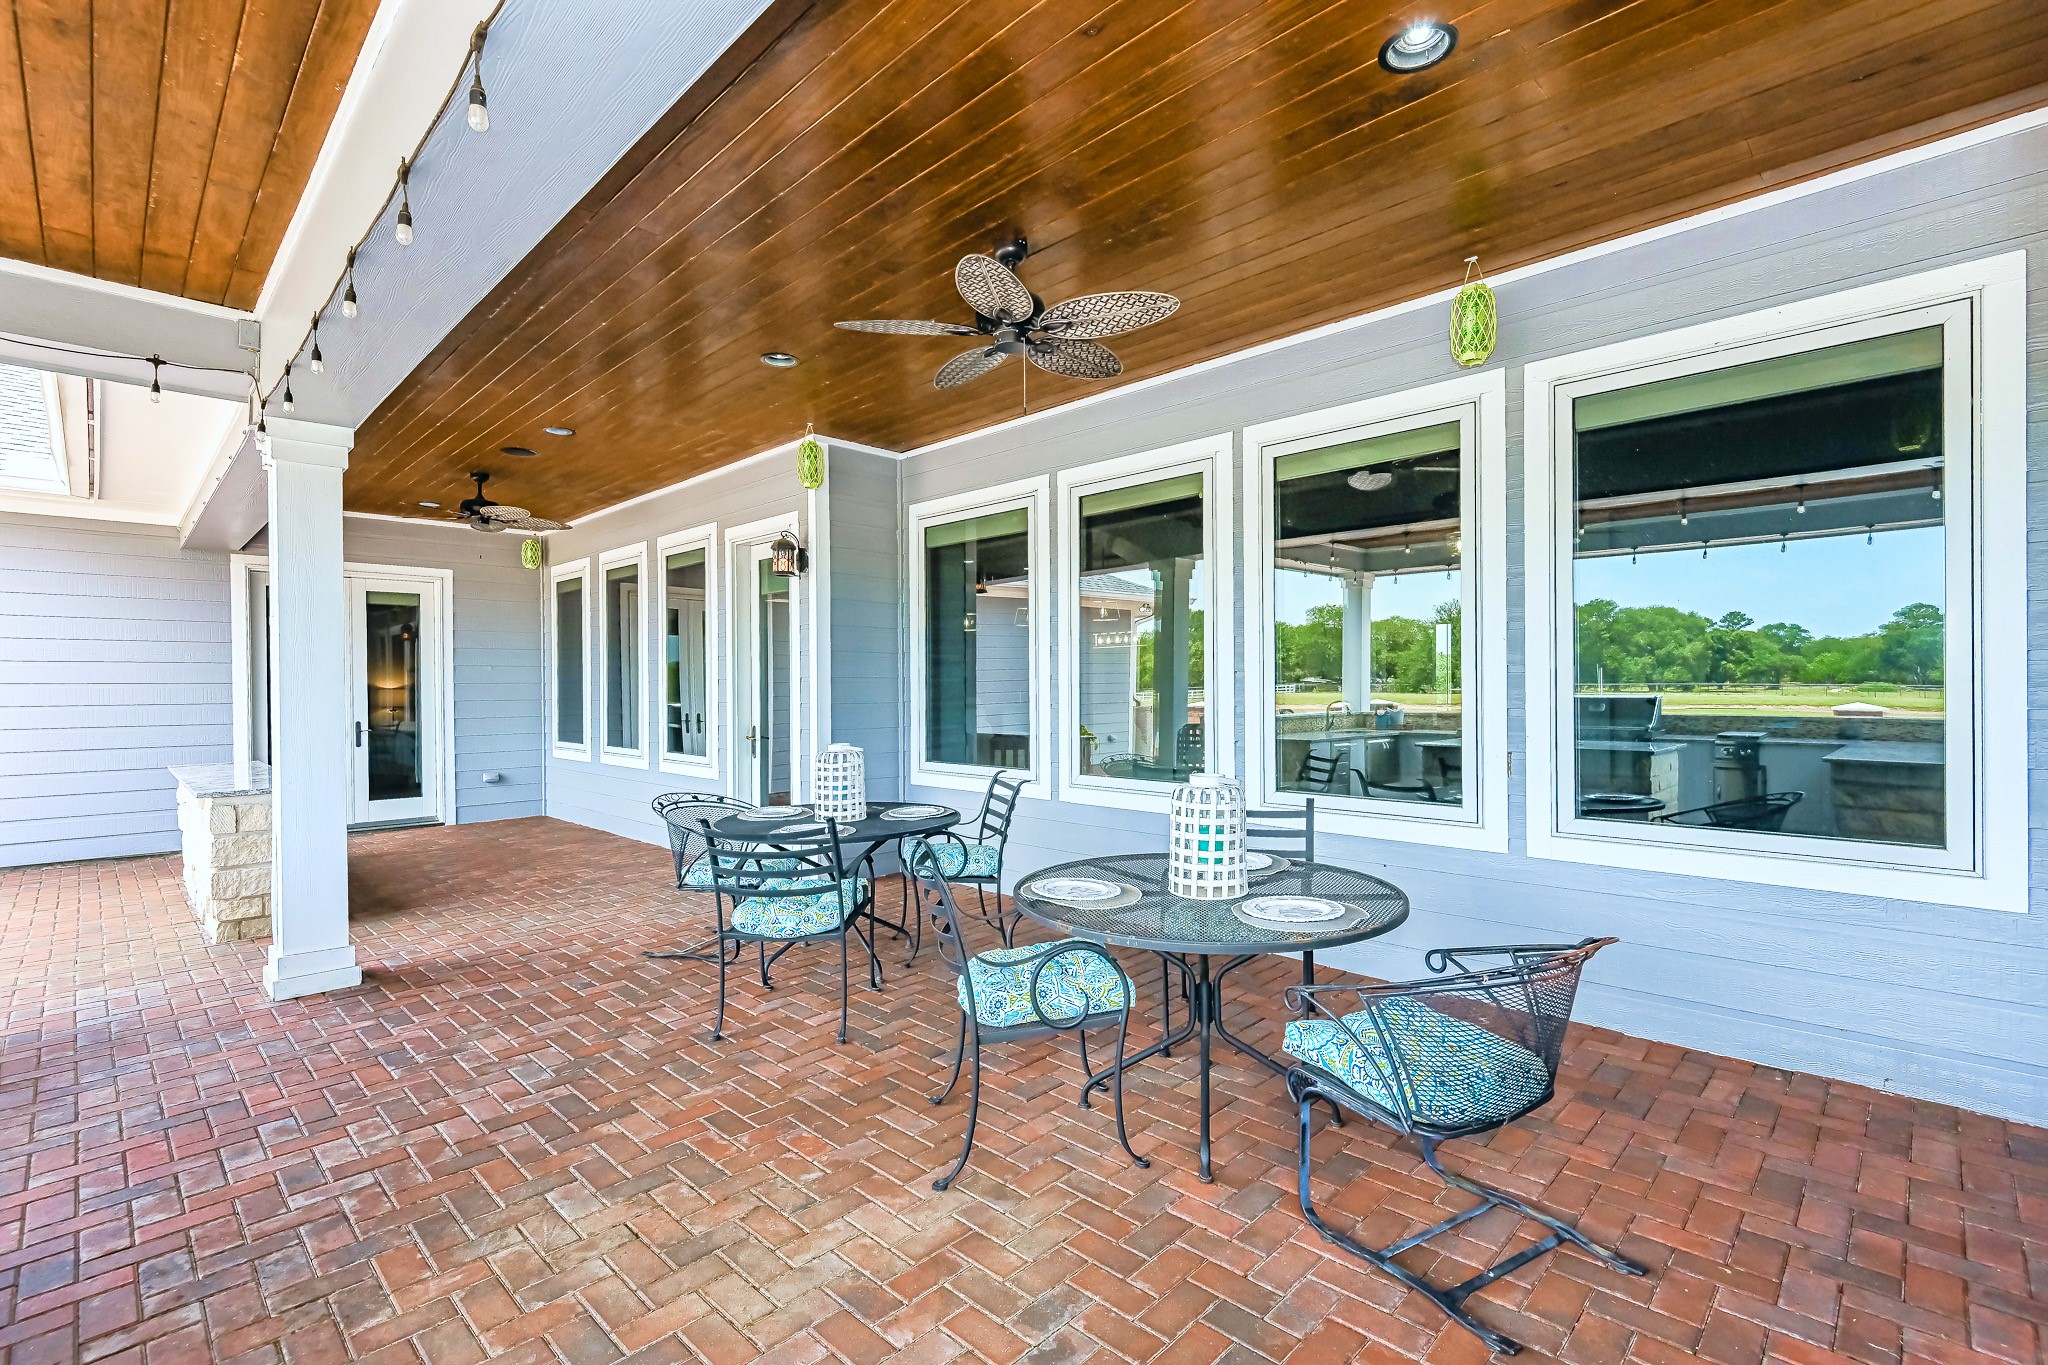 Enjoy listening to music piped in from your five outdoor speakers on this Huge Veranda with  space for tables and an outdoor living space.